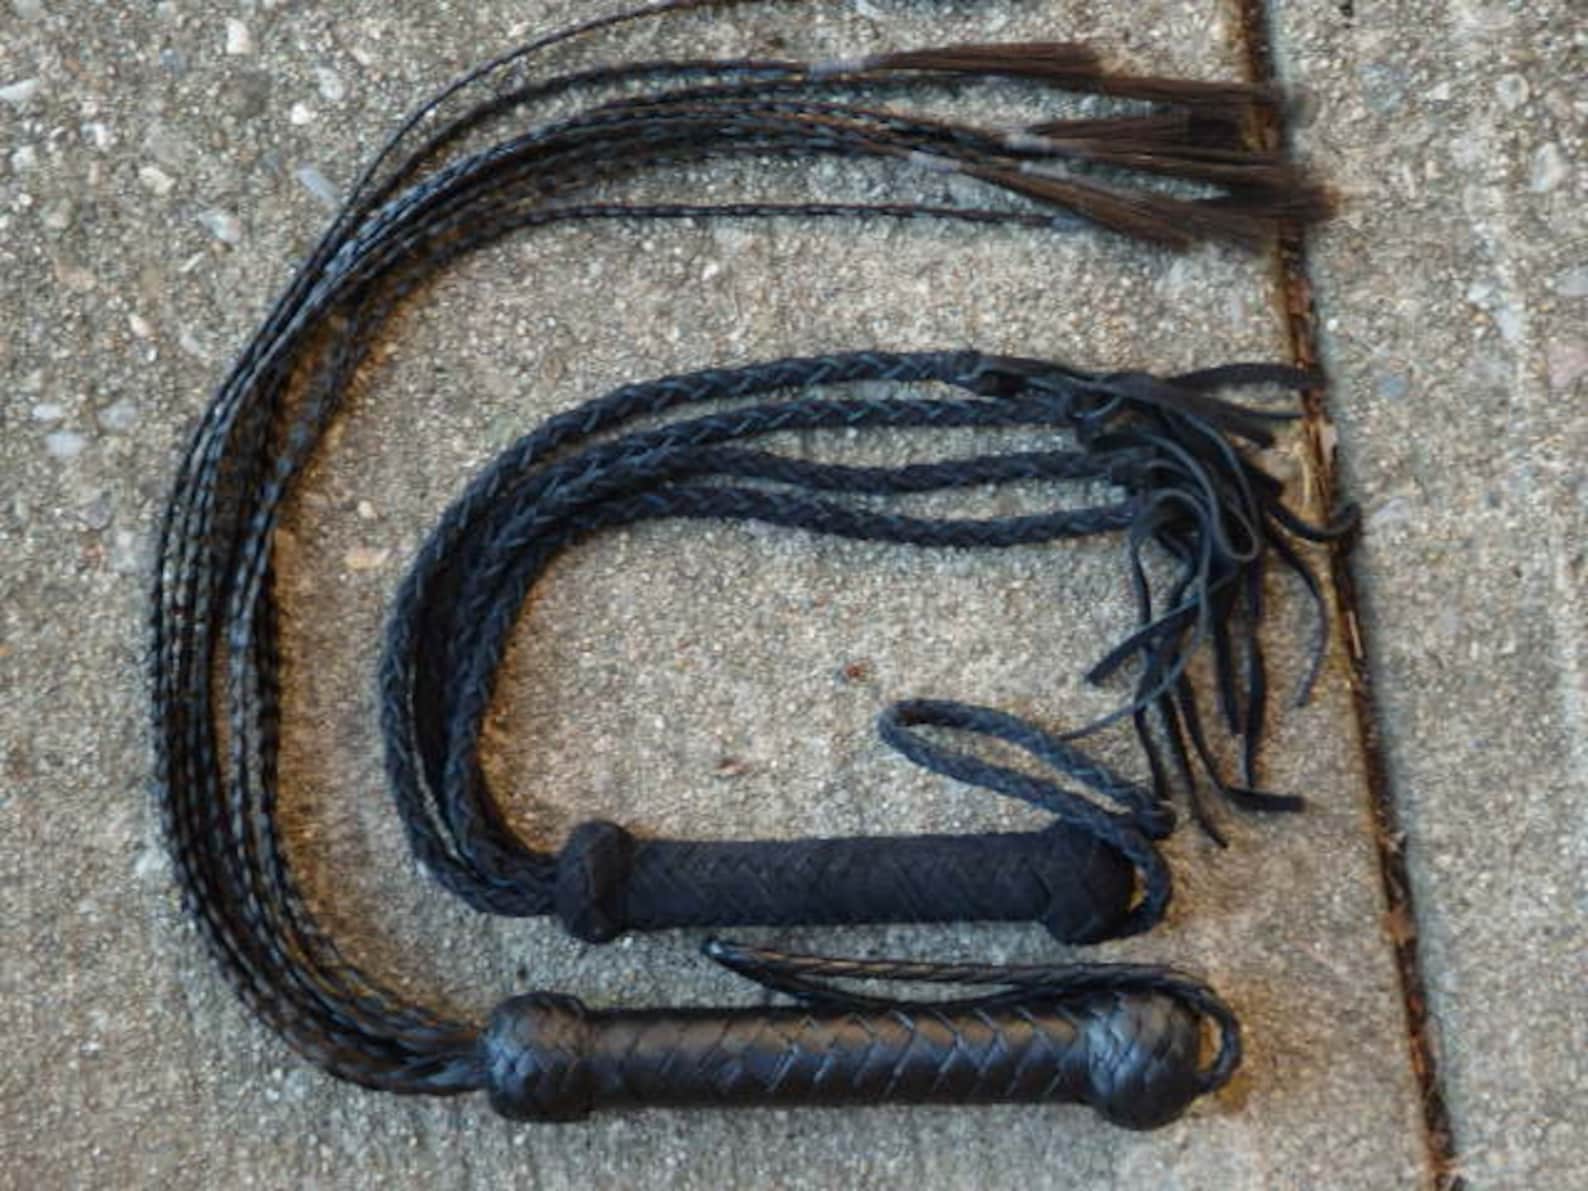 Does anyone use a Flogger? - Fishing Tackle - Bass Fishing Forums